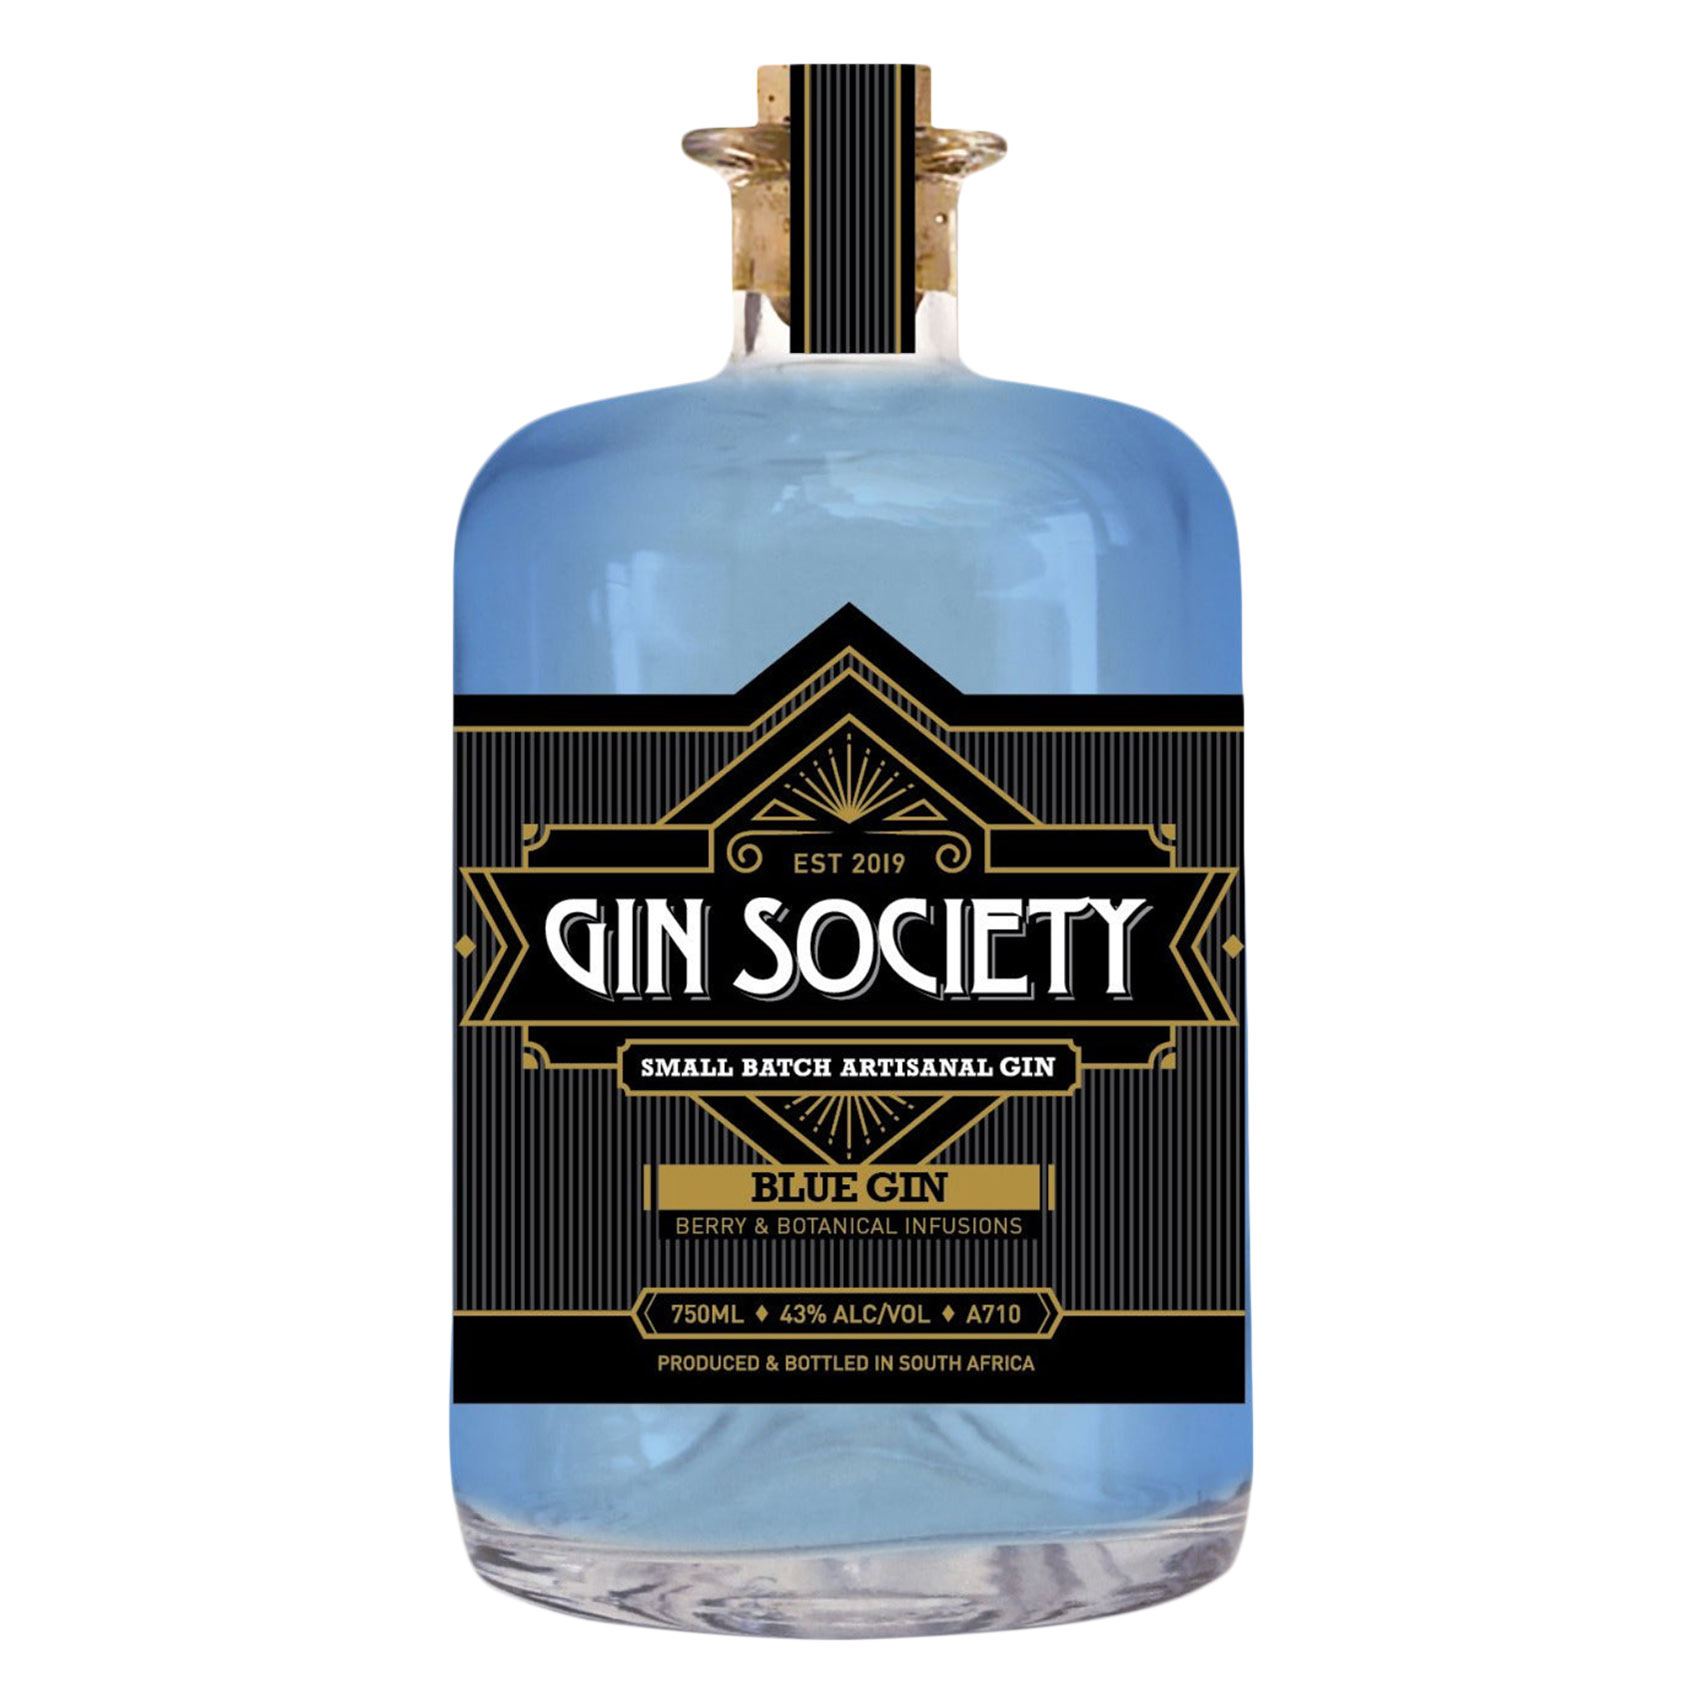 Gin Society Berry And Botanical Infusion Blue Gin 750Ml